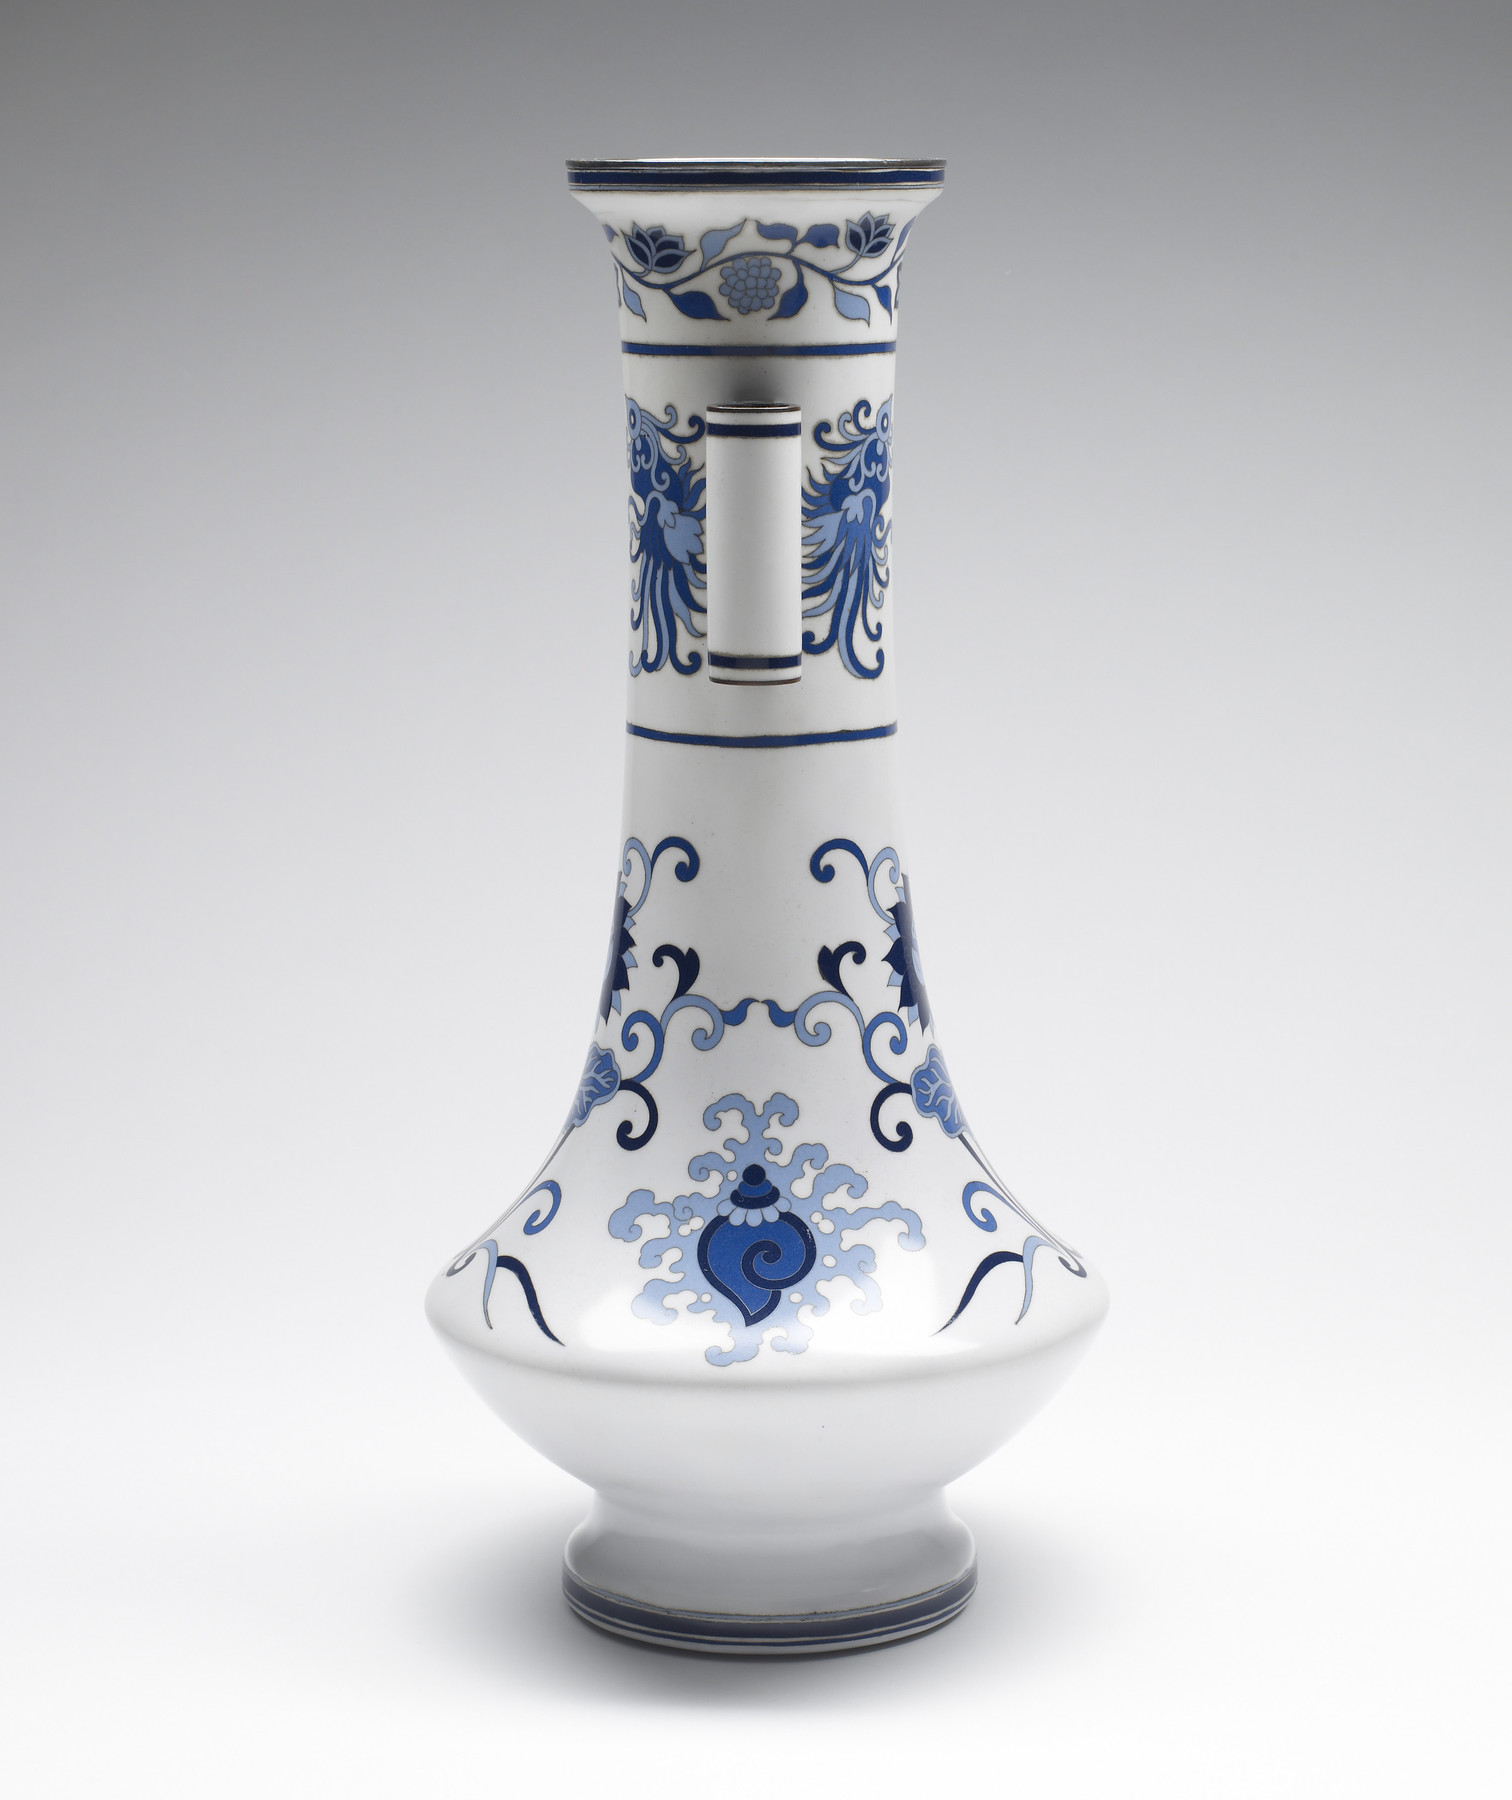 Image for One of a Pair of Vases Decorated with Blue and White Ceramic Designs